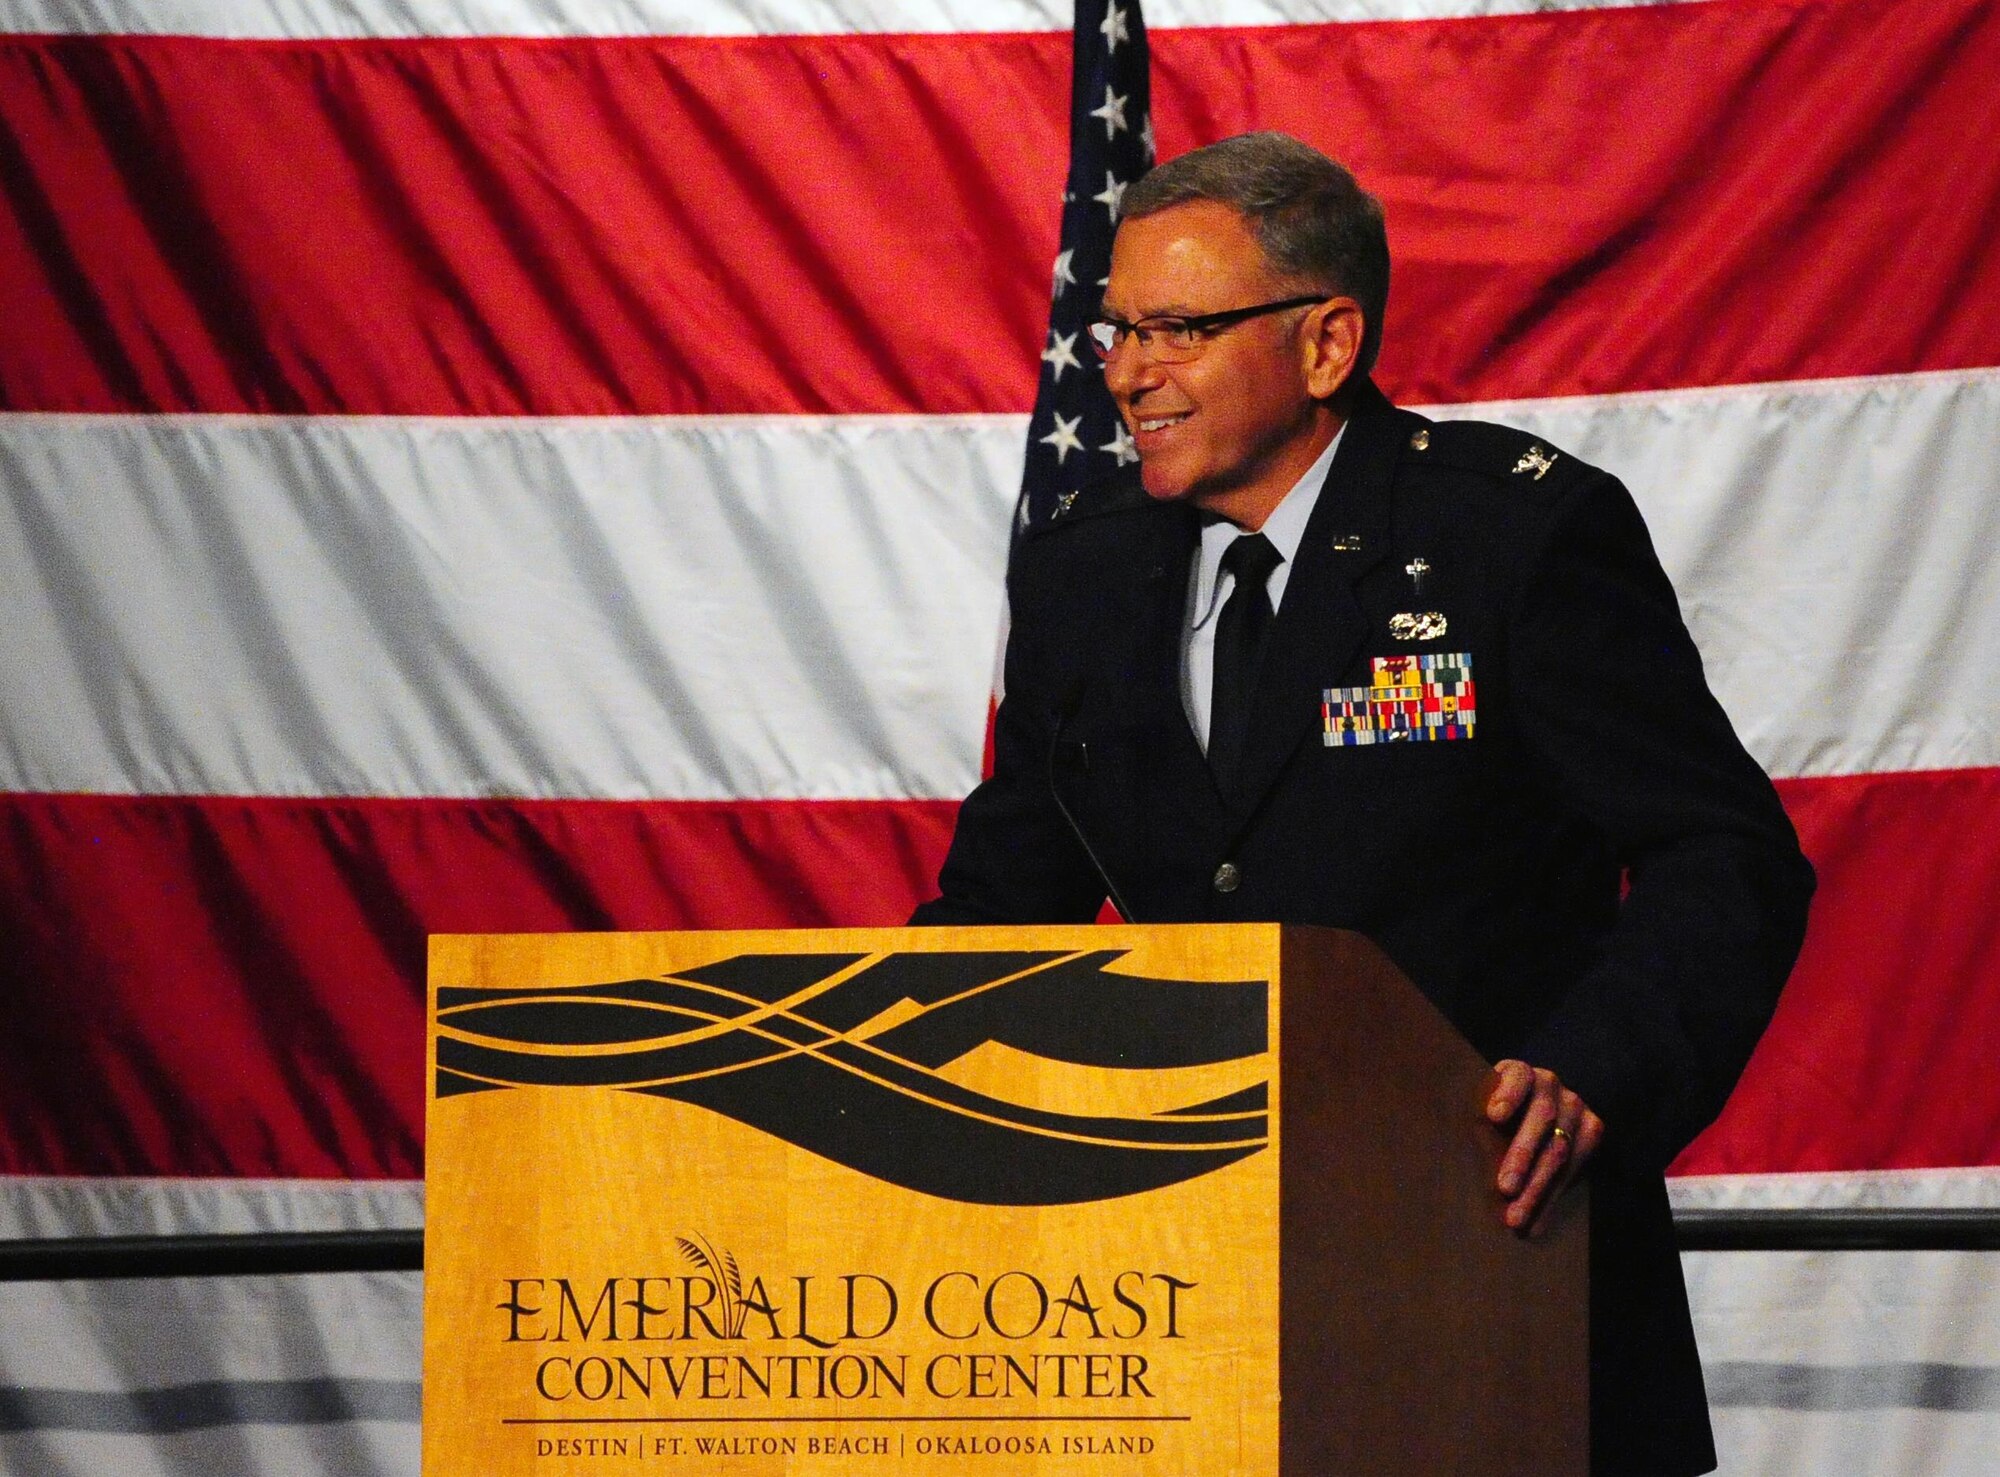 Chaplain (Col.) Steve Schaick, Air Education and Training Command Chaplain, speaks and leads prayer during Chief Master Sgt. of the Air Force #9 James C. Binnicker’s celebration of life ceremony at the Emerald Coast Convention Center, Fort Walton Beach Fla., March 28, 2015. More than 1,000 people attended Binnicker's celebration of life ceremony. He died March 21 in Calhoun, Ga. He was 76 years old. A memorial service and interment will be at Arlington National Cemetery, Virginia, at a later date. (U.S. Air Force photo/Airman 1st Class Andrea Posey)